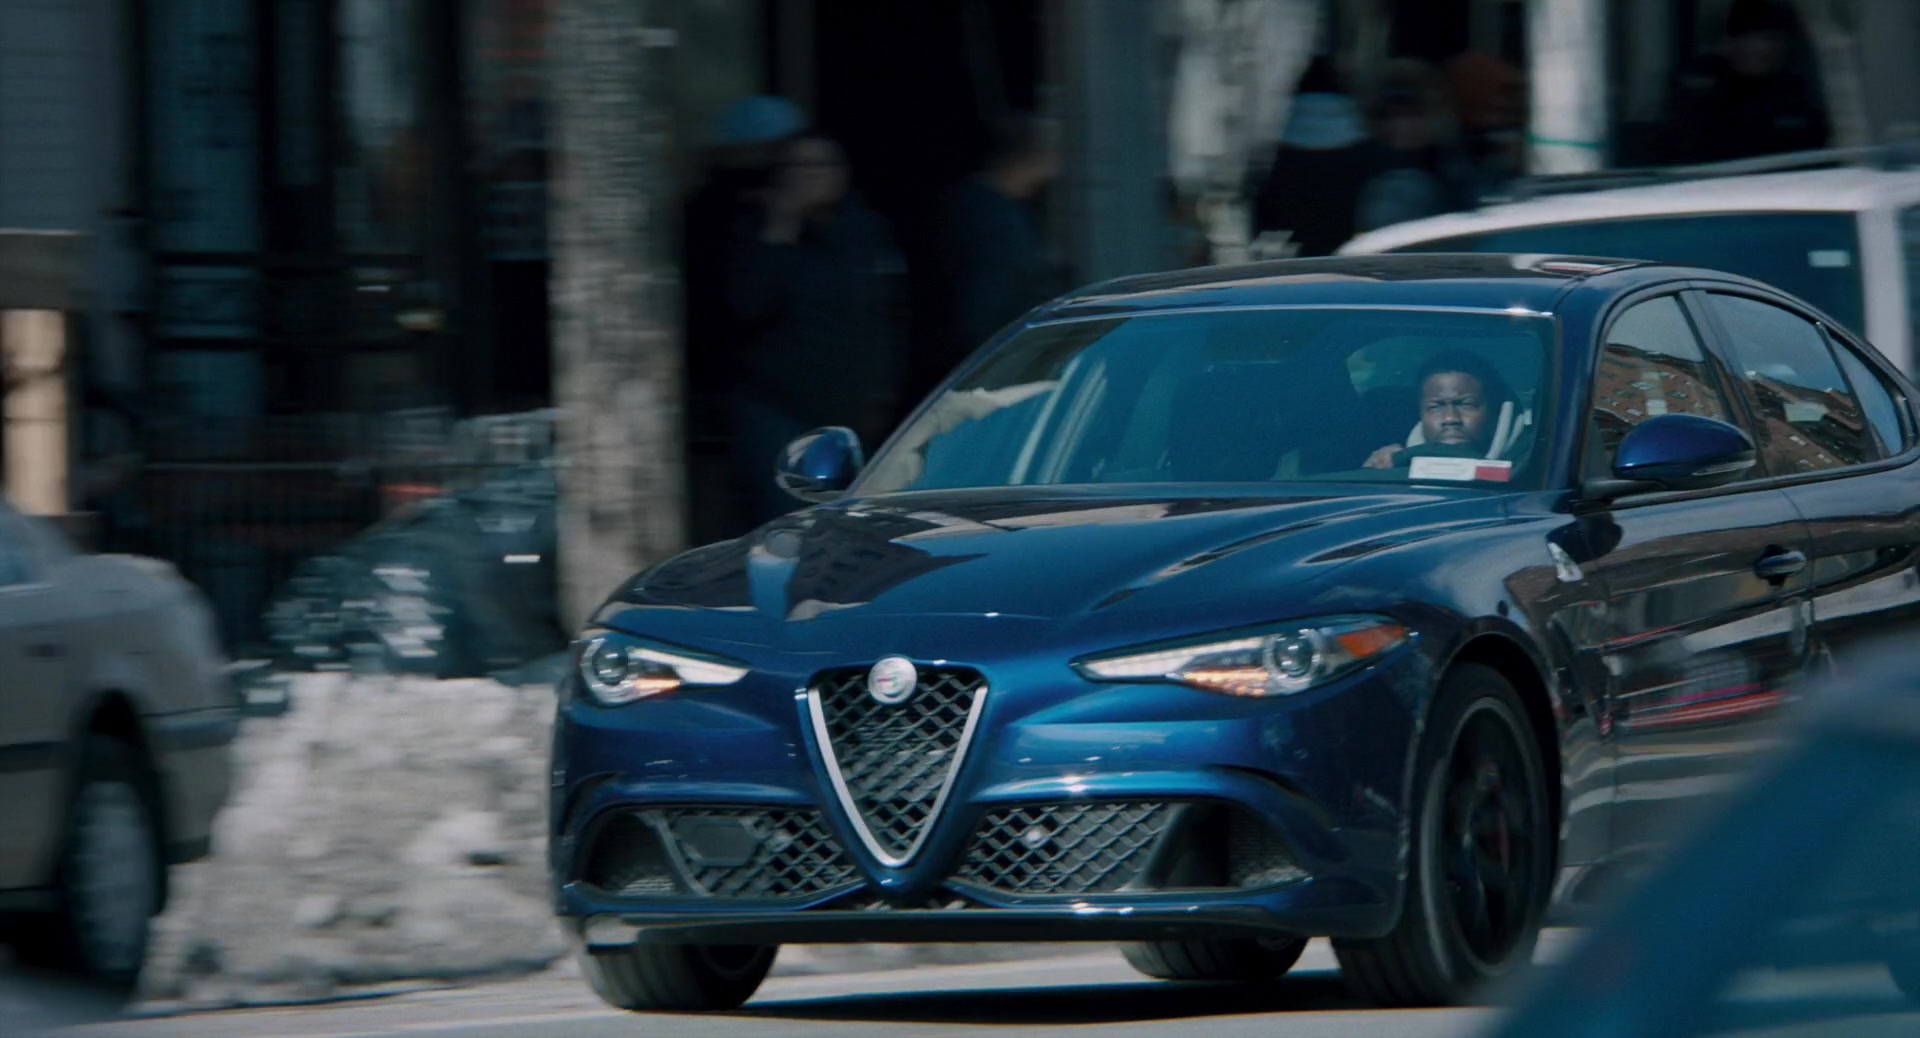 Alfa-Romeo-Blue-Car-Driven-by-Kevin-Hart-in-The-Upside-2.jpg